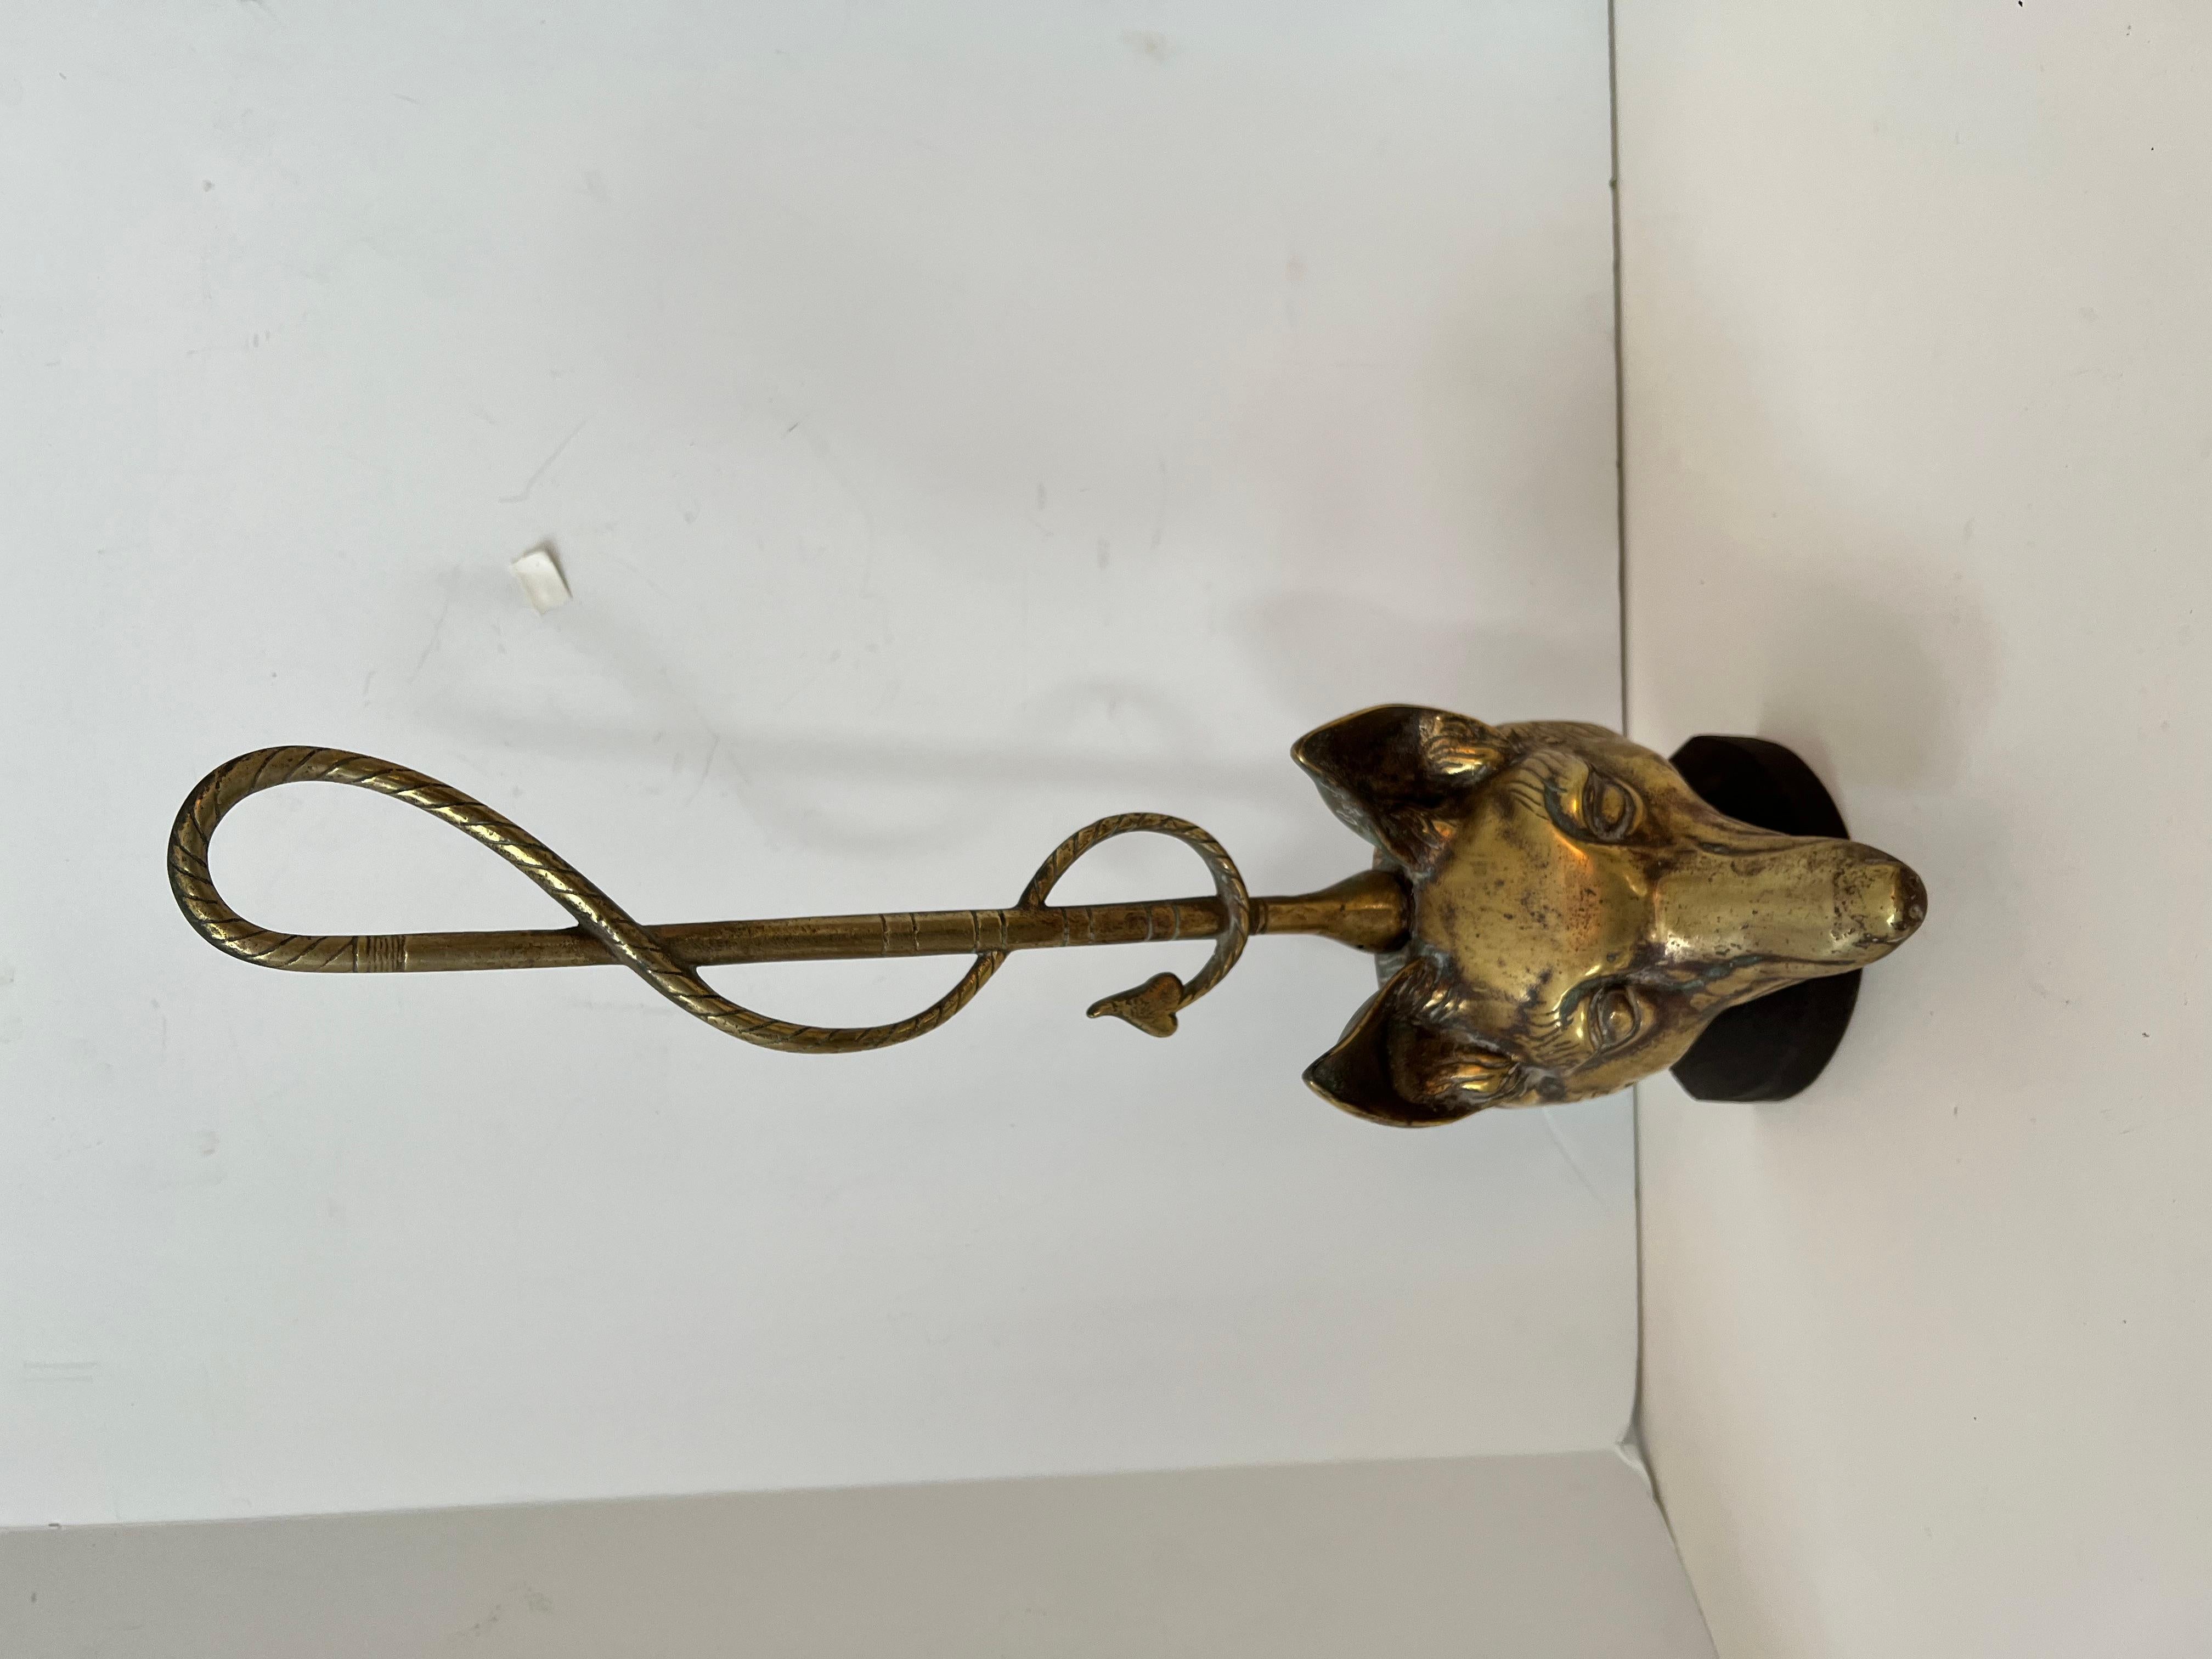 20th Century English Art Deco Brass Fox Door Stop With Riding Crop For Sale